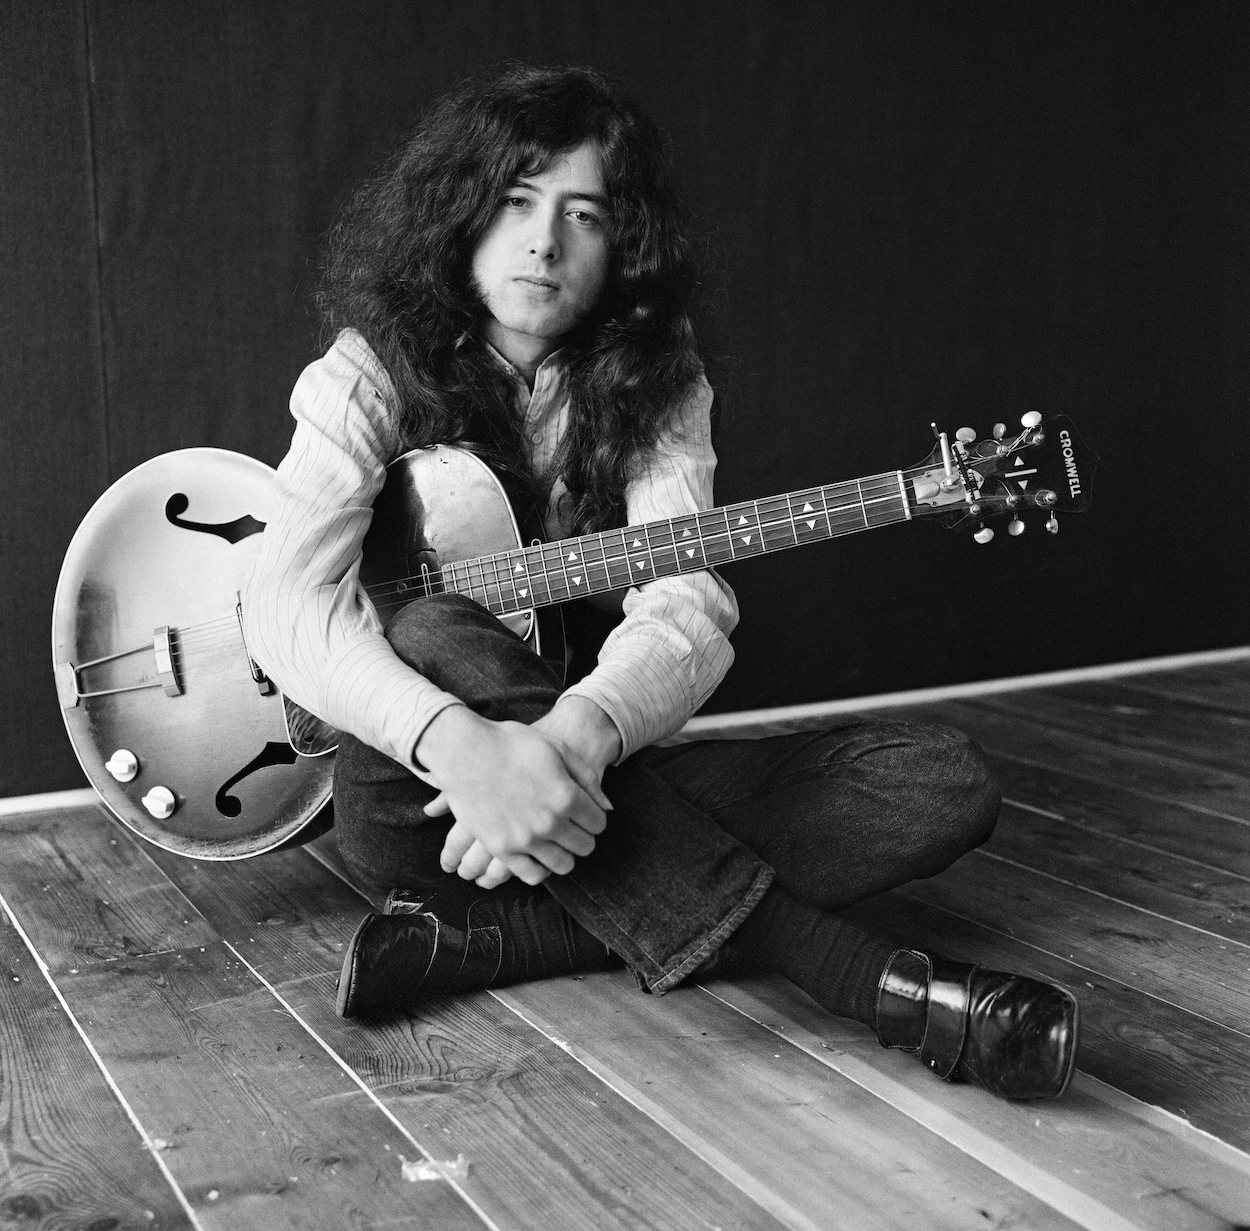 Jimmy Page Once Explained ‘What’s So Cool’ About All Guitar Playing, and He Has a Point